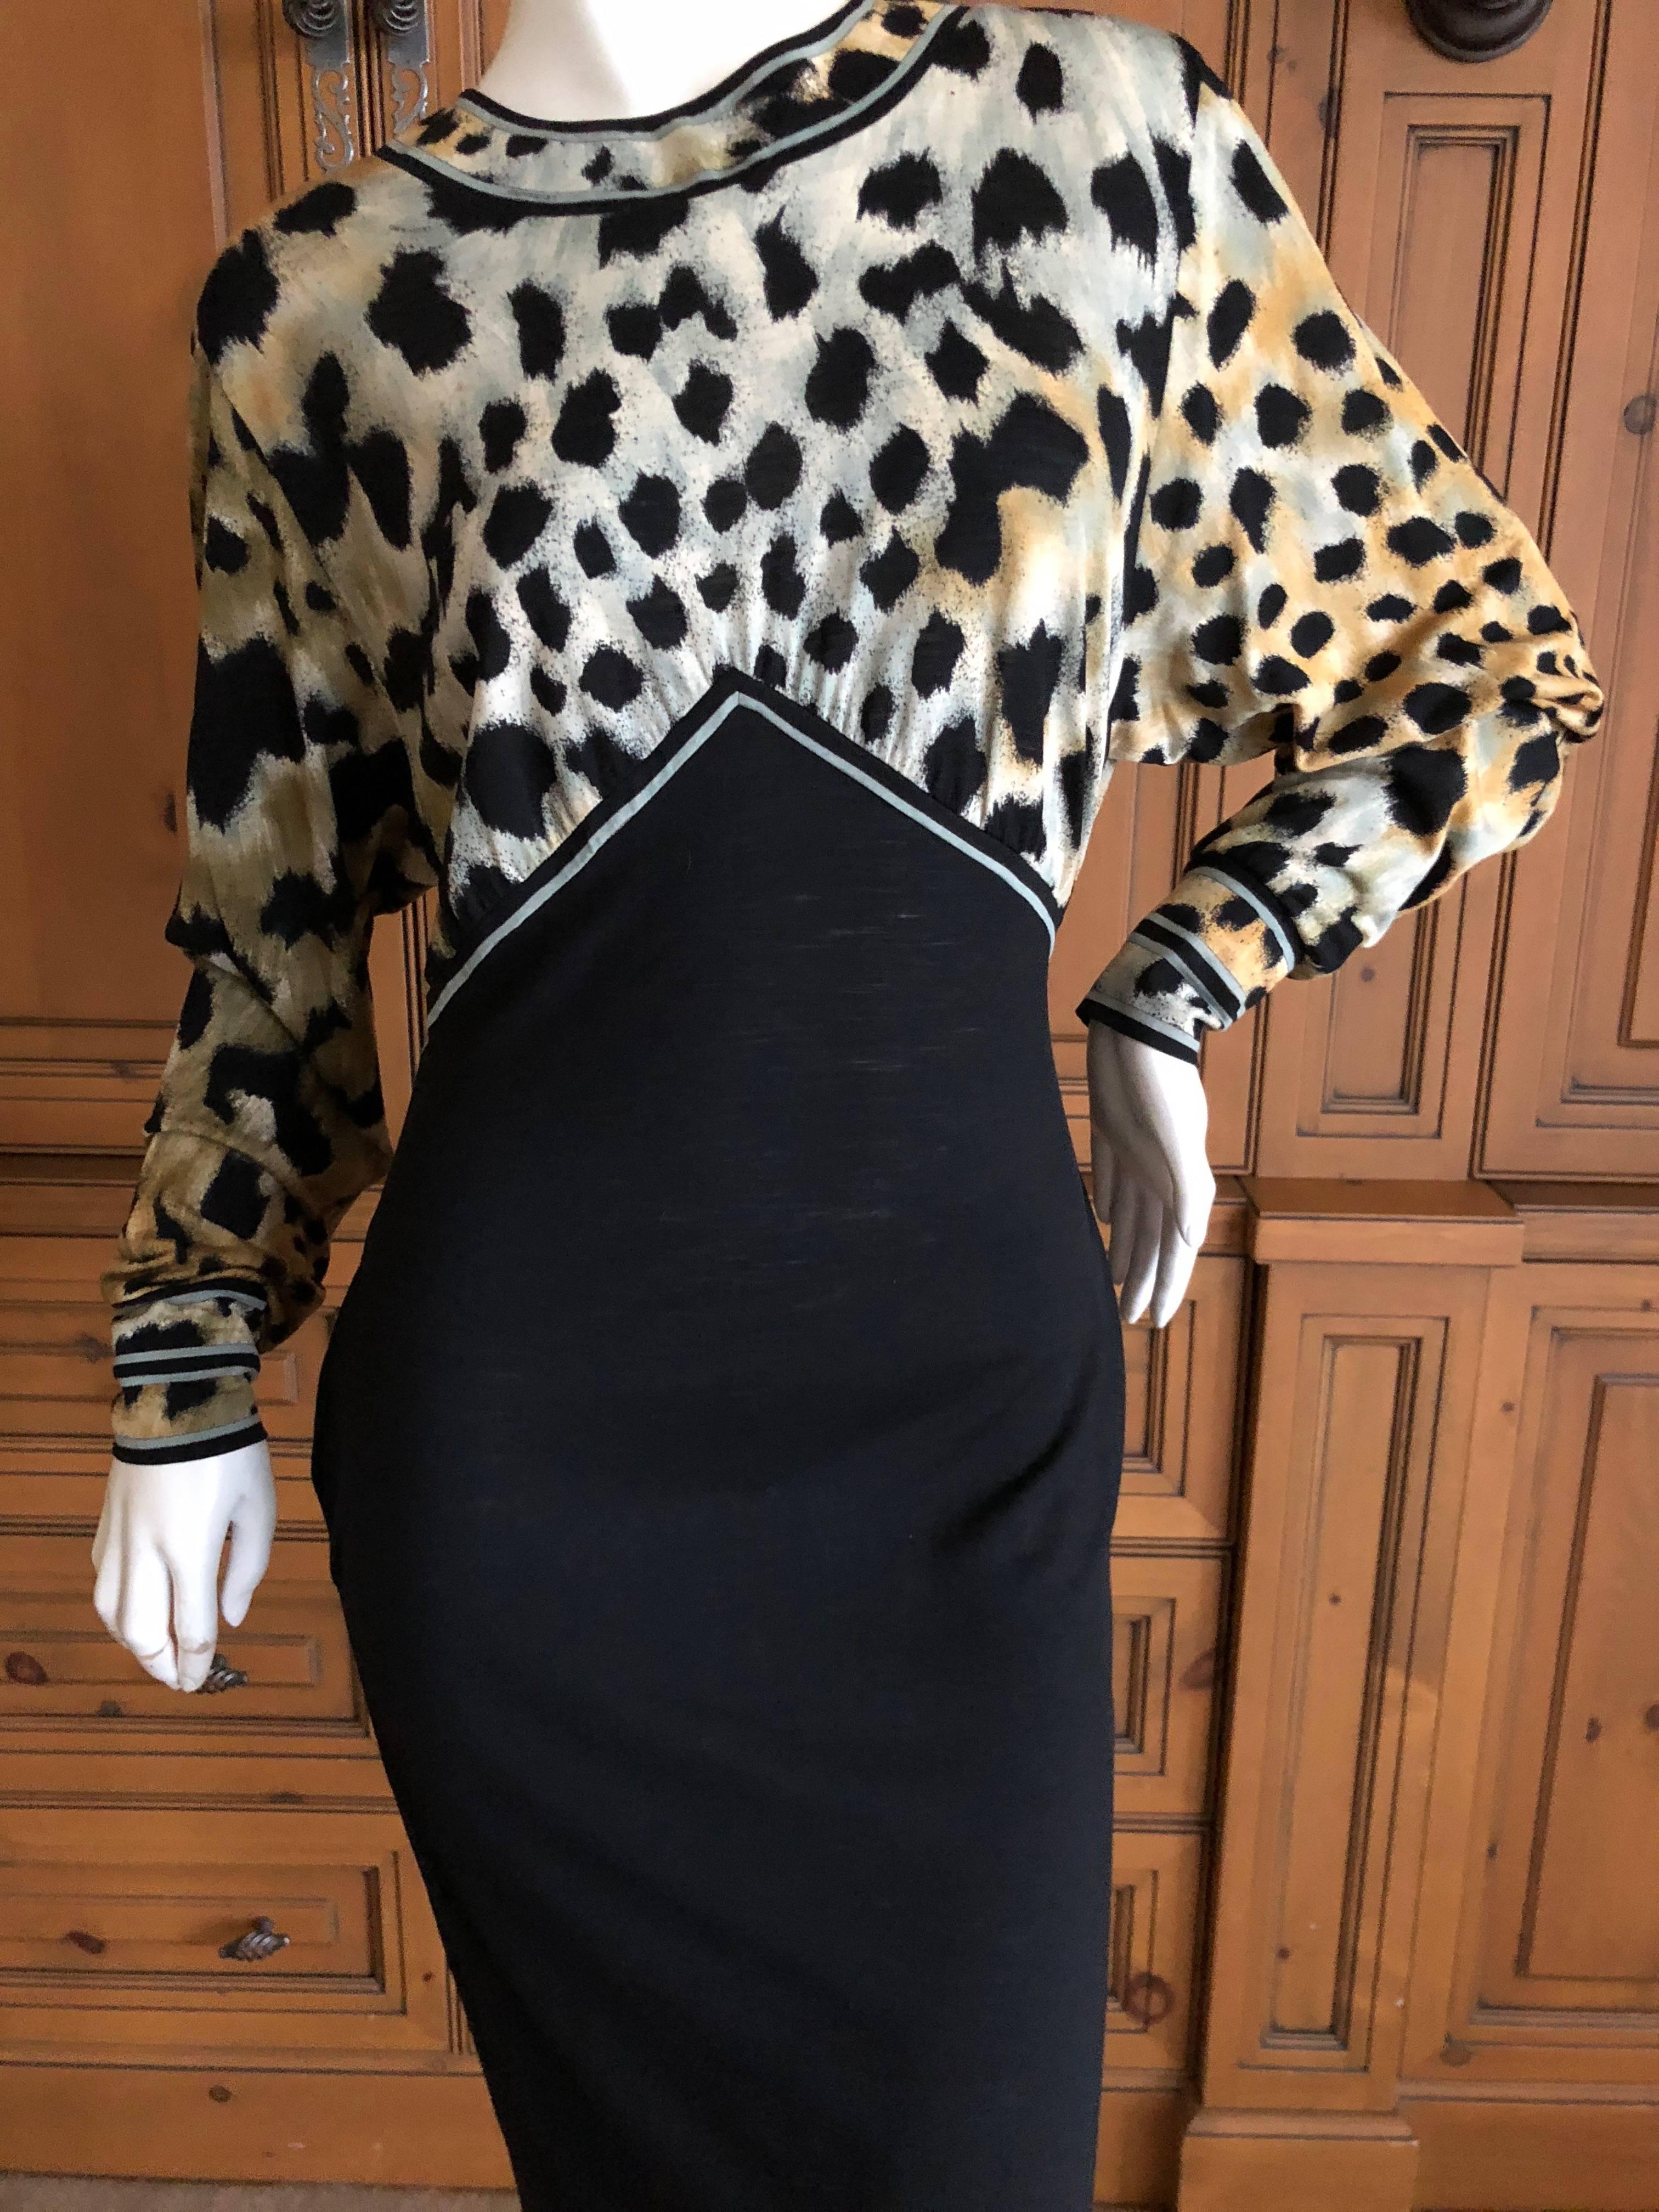 Leonard Paris for Bergdorf Goodman 1970's Leopard Jersey Dress In Excellent Condition For Sale In Cloverdale, CA